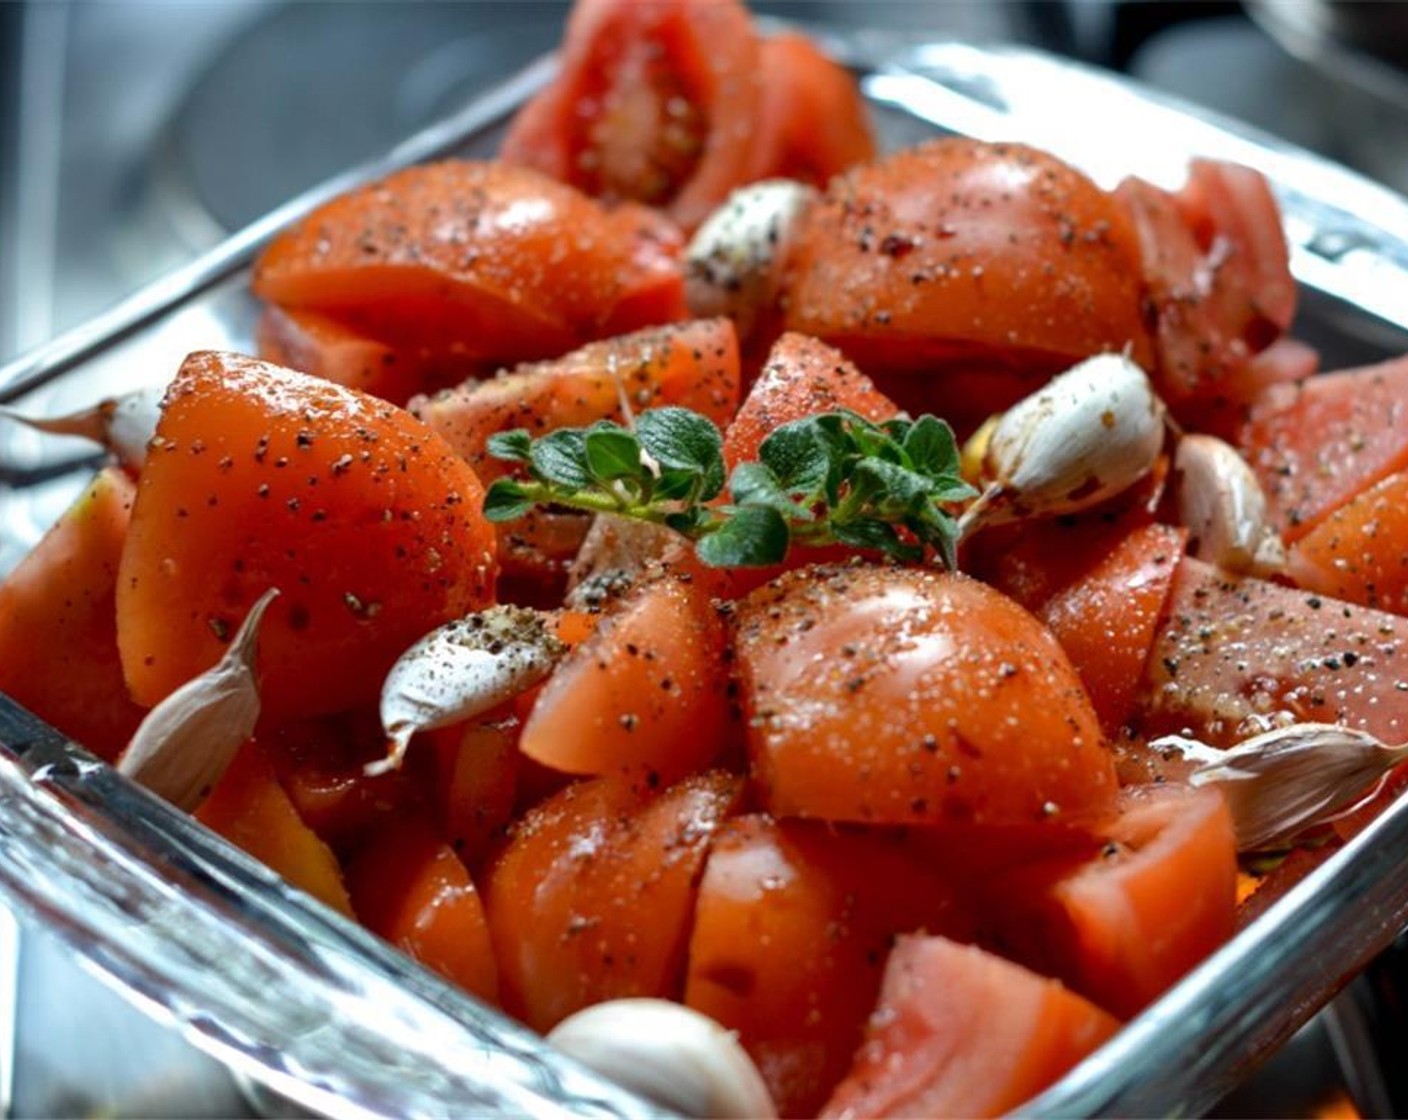 step 1 In a roasting pan, arrange the Tomatoes (8), Garlic (6 cloves), and Yellow Onion (1). Drizzle with Olive Oil (1/4 cup), Balsamic Reduction (1 Tbsp), and Dry Red Wine (1/3 cup).